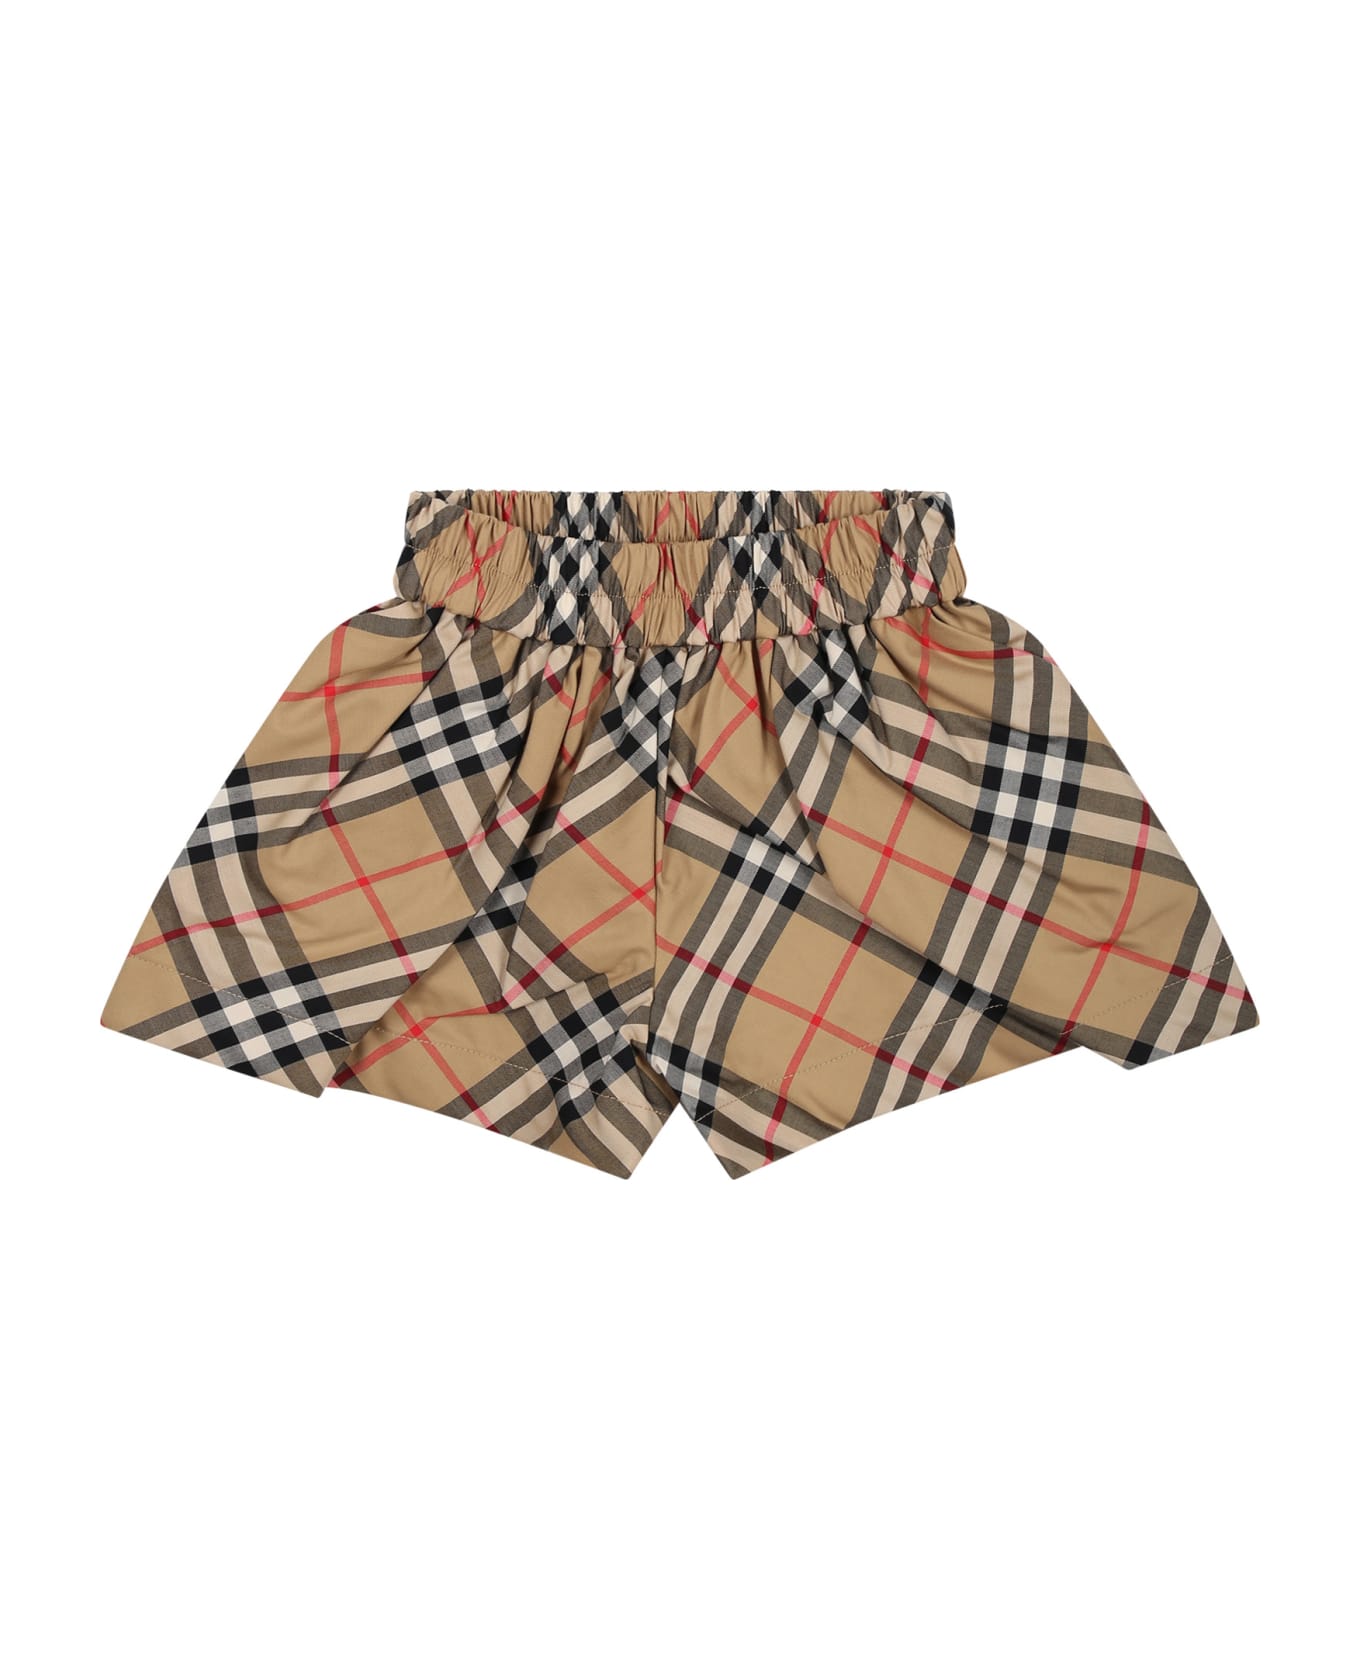 Burberry Beige Shorts For Baby Girl With Iconic All-over Vintage Check - Archive Beige Ip Check